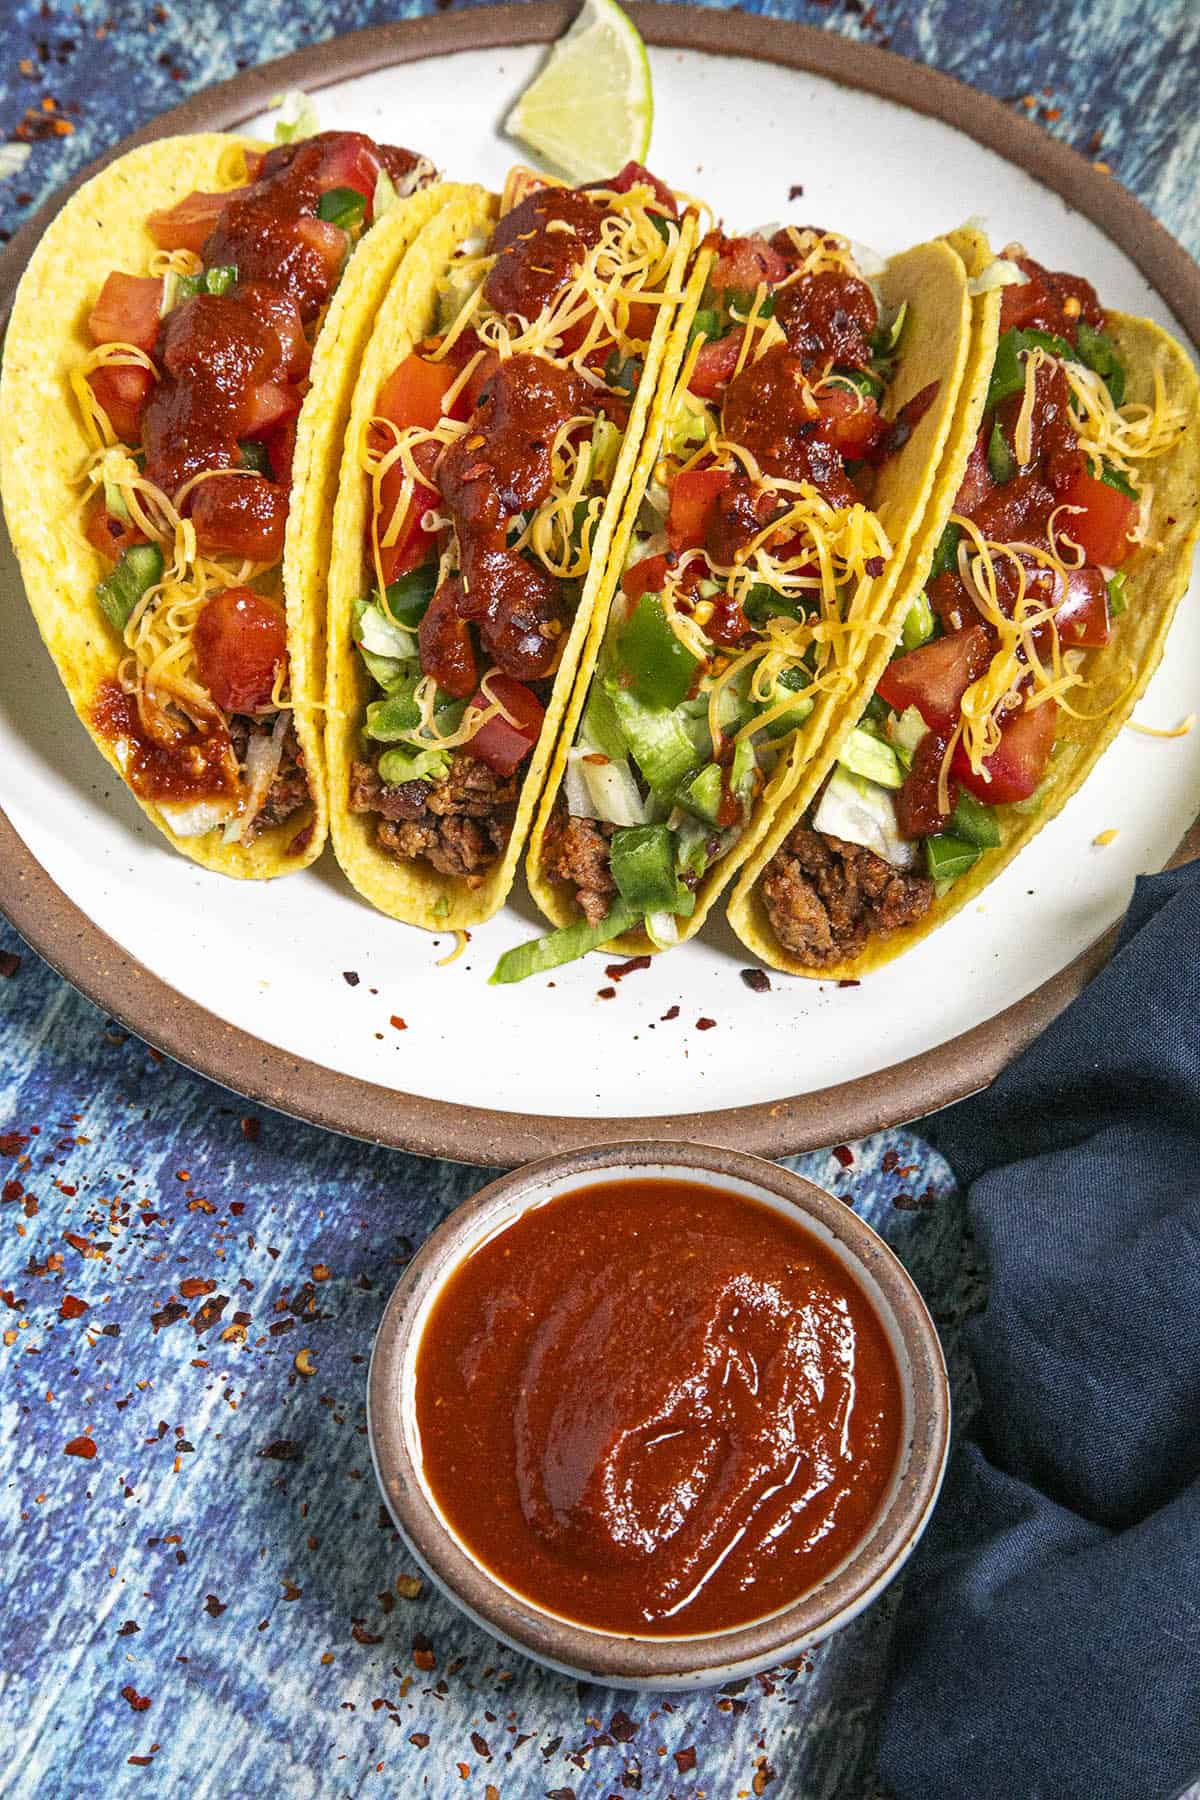 Taco Sauce drizzled onto crunchy tacos